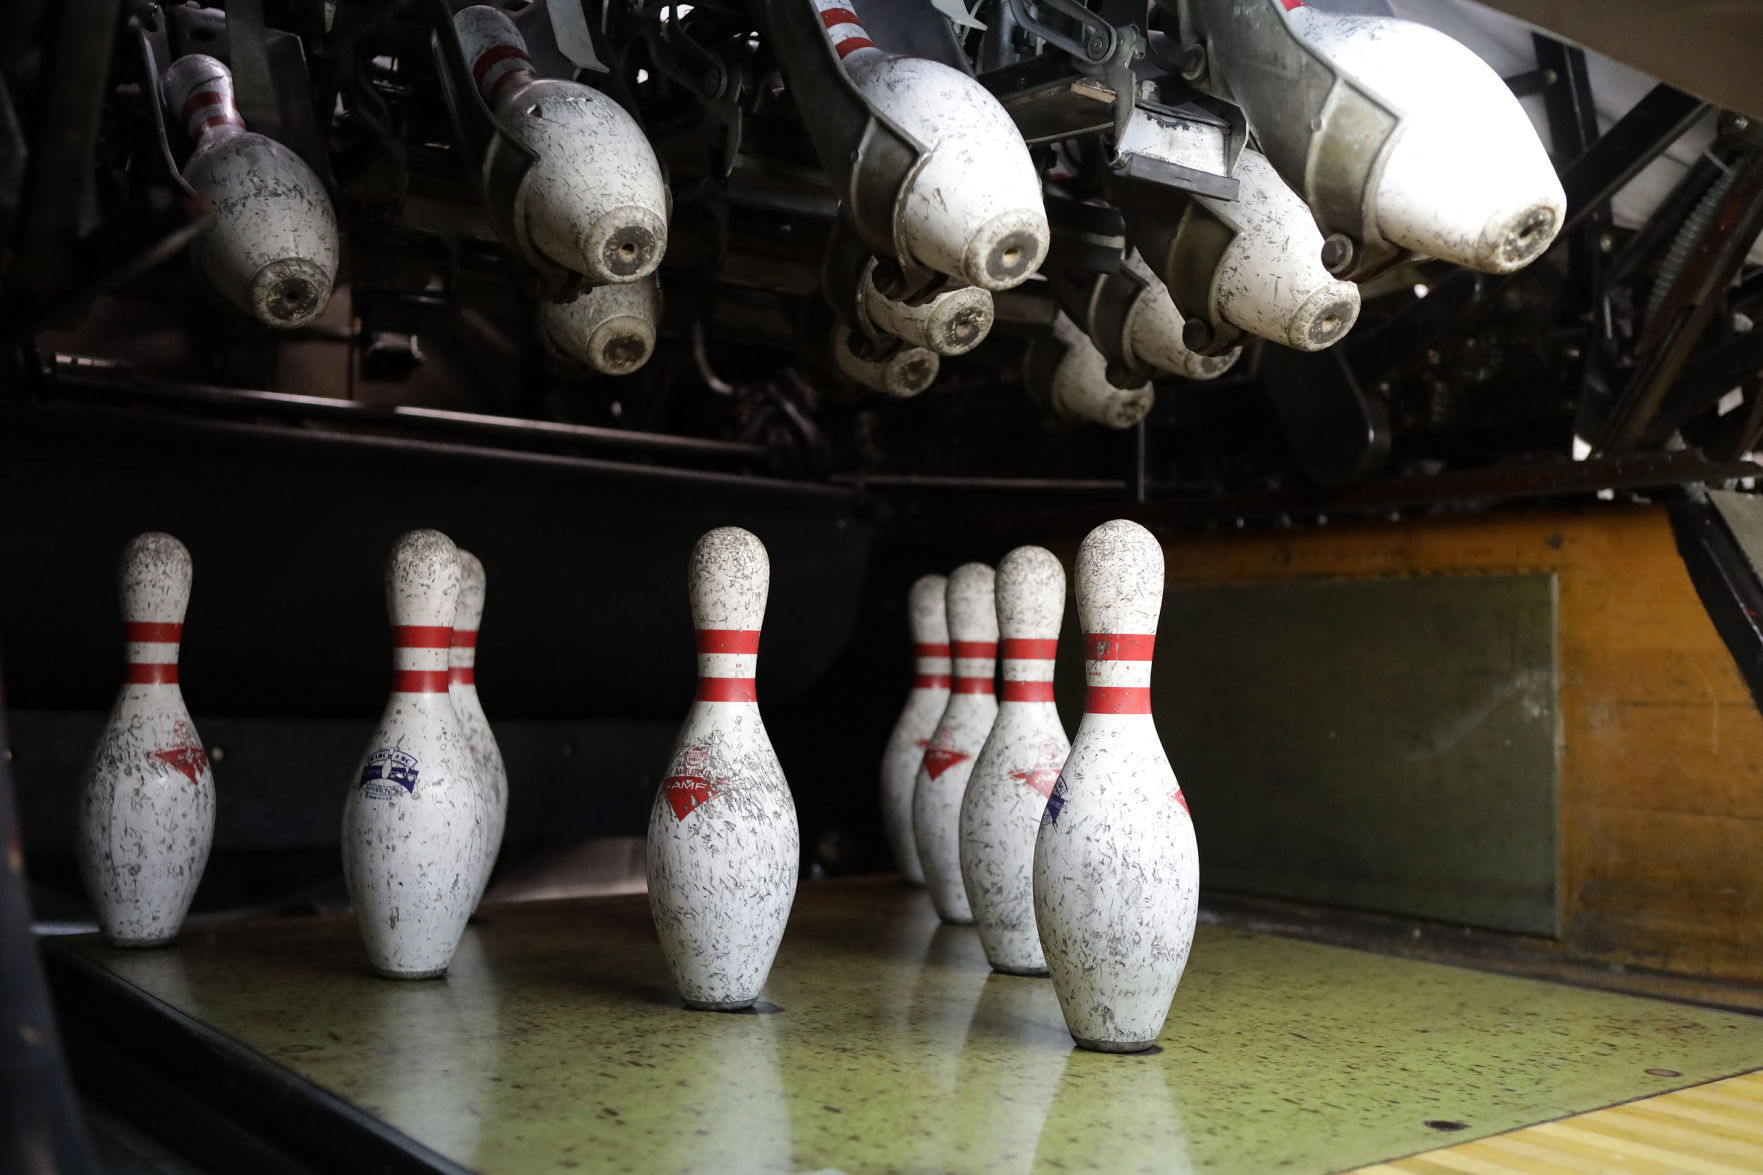 Manual scoring, vintage pinsetters keep Frankfort Bowl and Billiards right at home